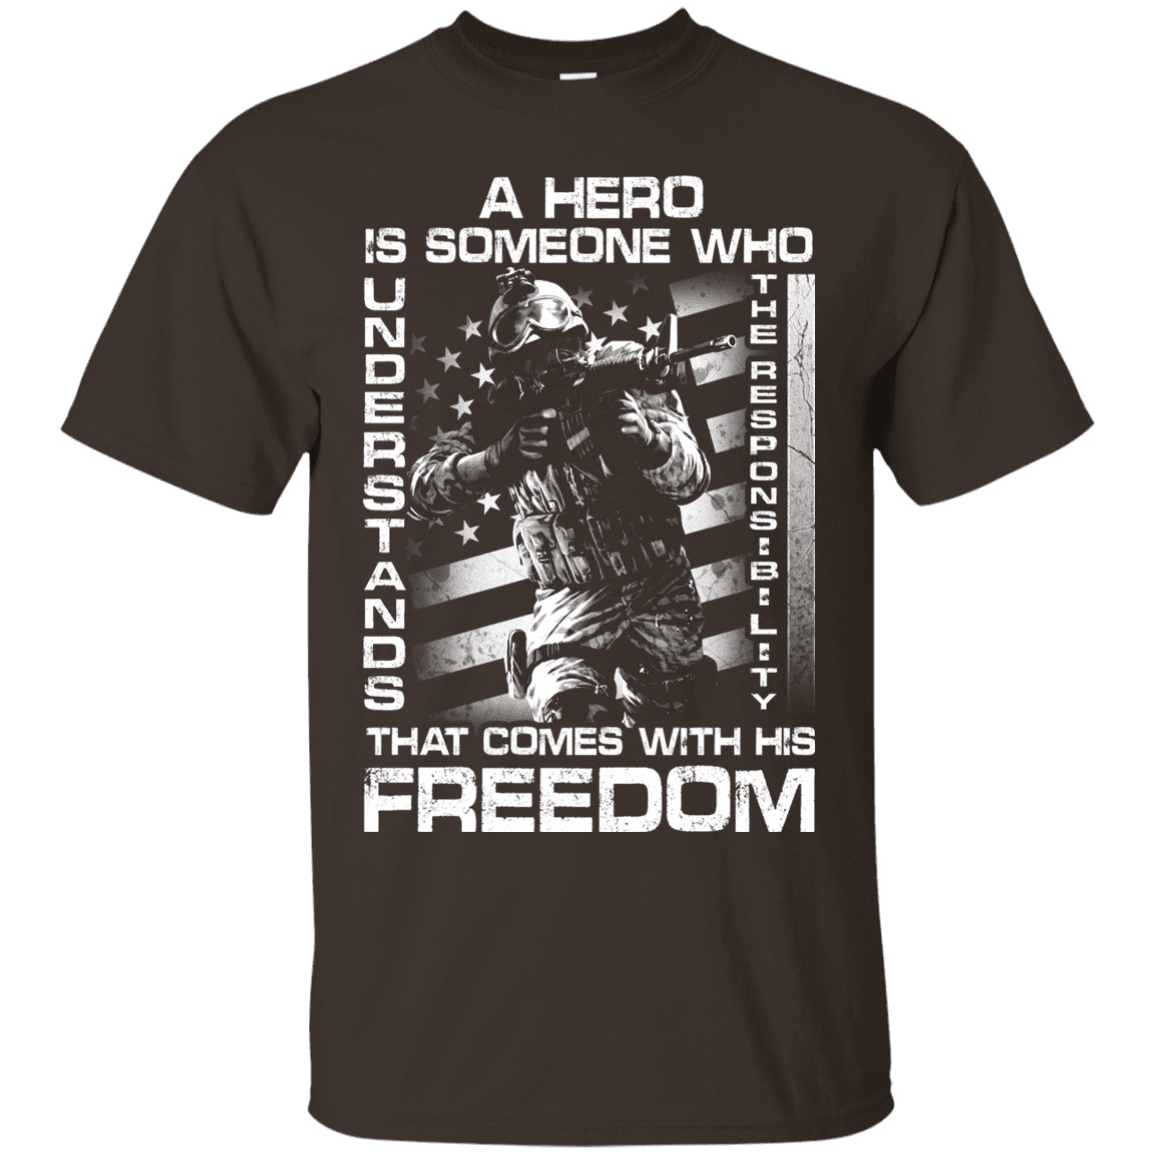 Military T-Shirt "A Hero Is Someone Who Understands The Responsibility"-TShirt-General-Veterans Nation